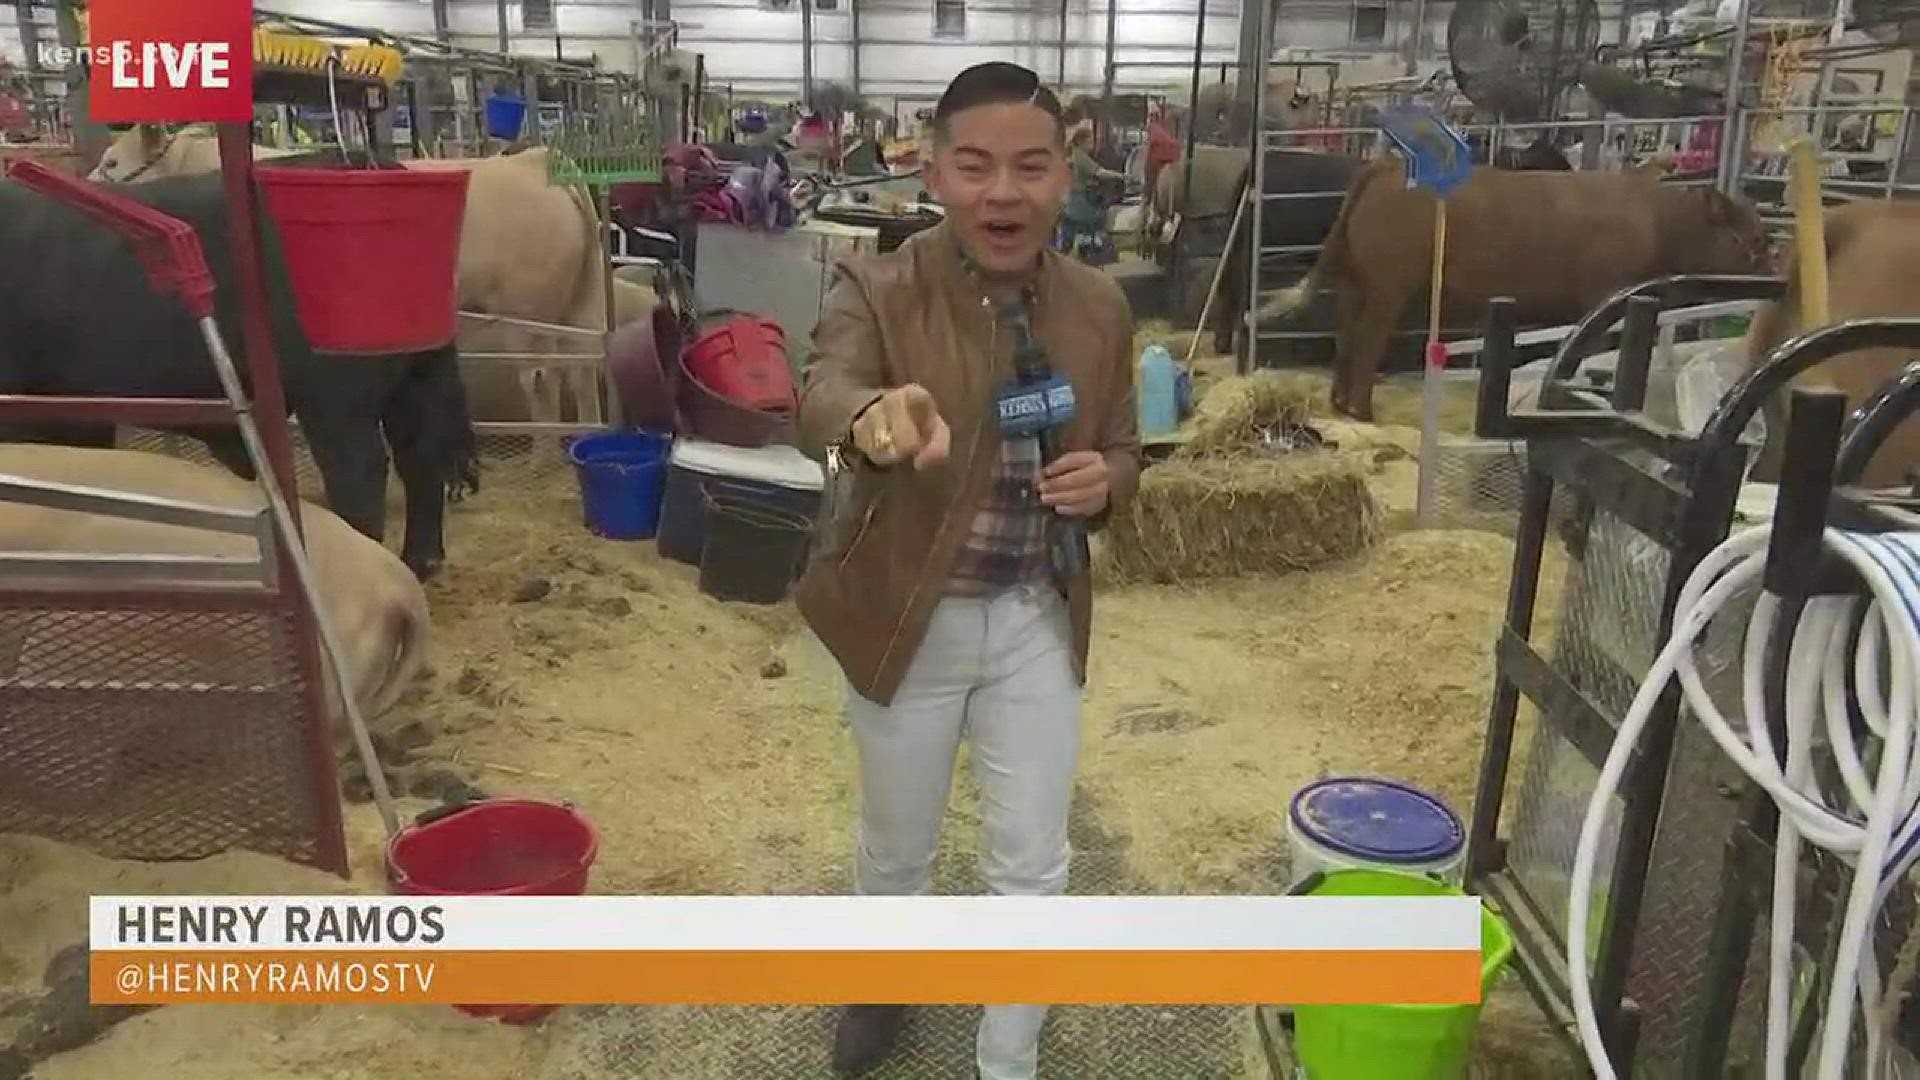 KENS 5 Reporter Henry Ramos talks to kids raising live stock at the San Antonio Stock Show and Rodeo.